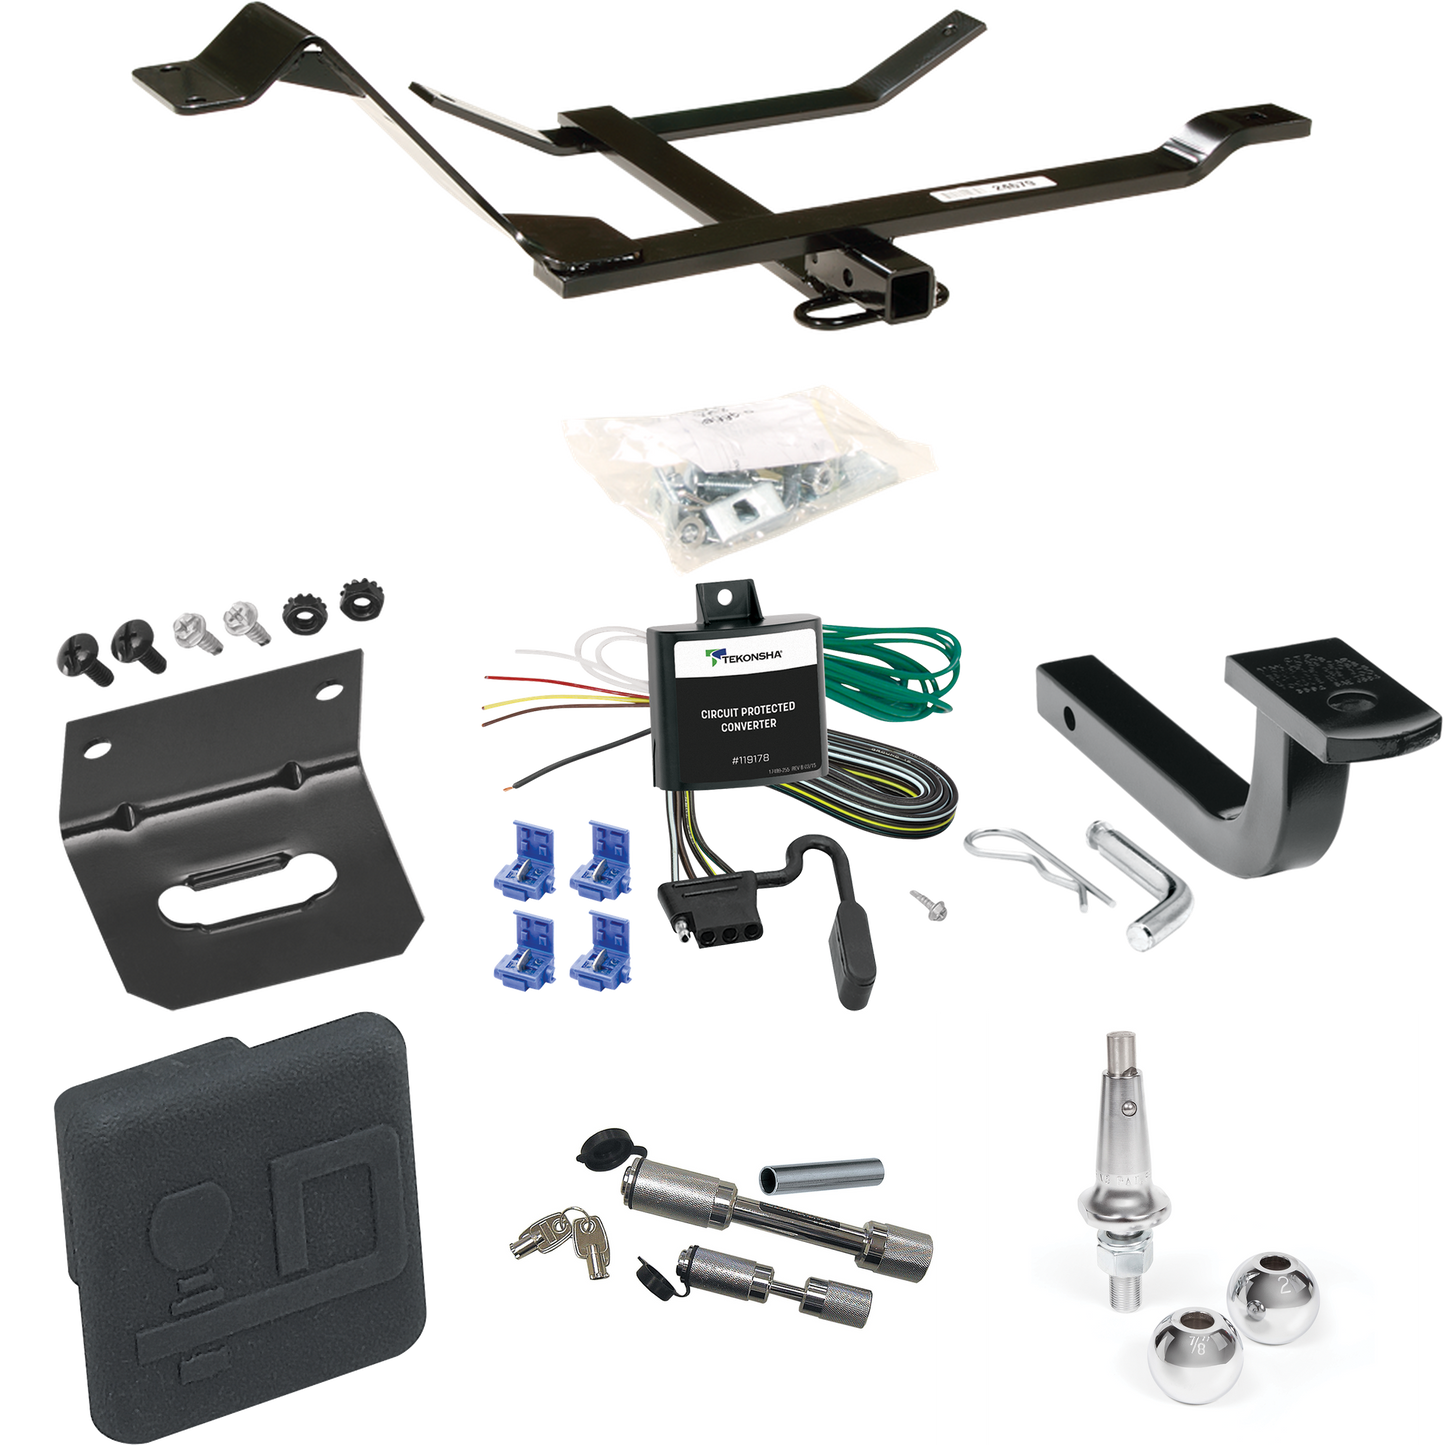 Fits 1999-2006 Volkswagen Golf Trailer Hitch Tow PKG w/ 4-Flat Wiring Harness + Draw-Bar + Interchangeable 1-7/8" & 2" Balls + Wiring Bracket + Hitch Cover + Dual Hitch & Coupler Locks By Draw-Tite